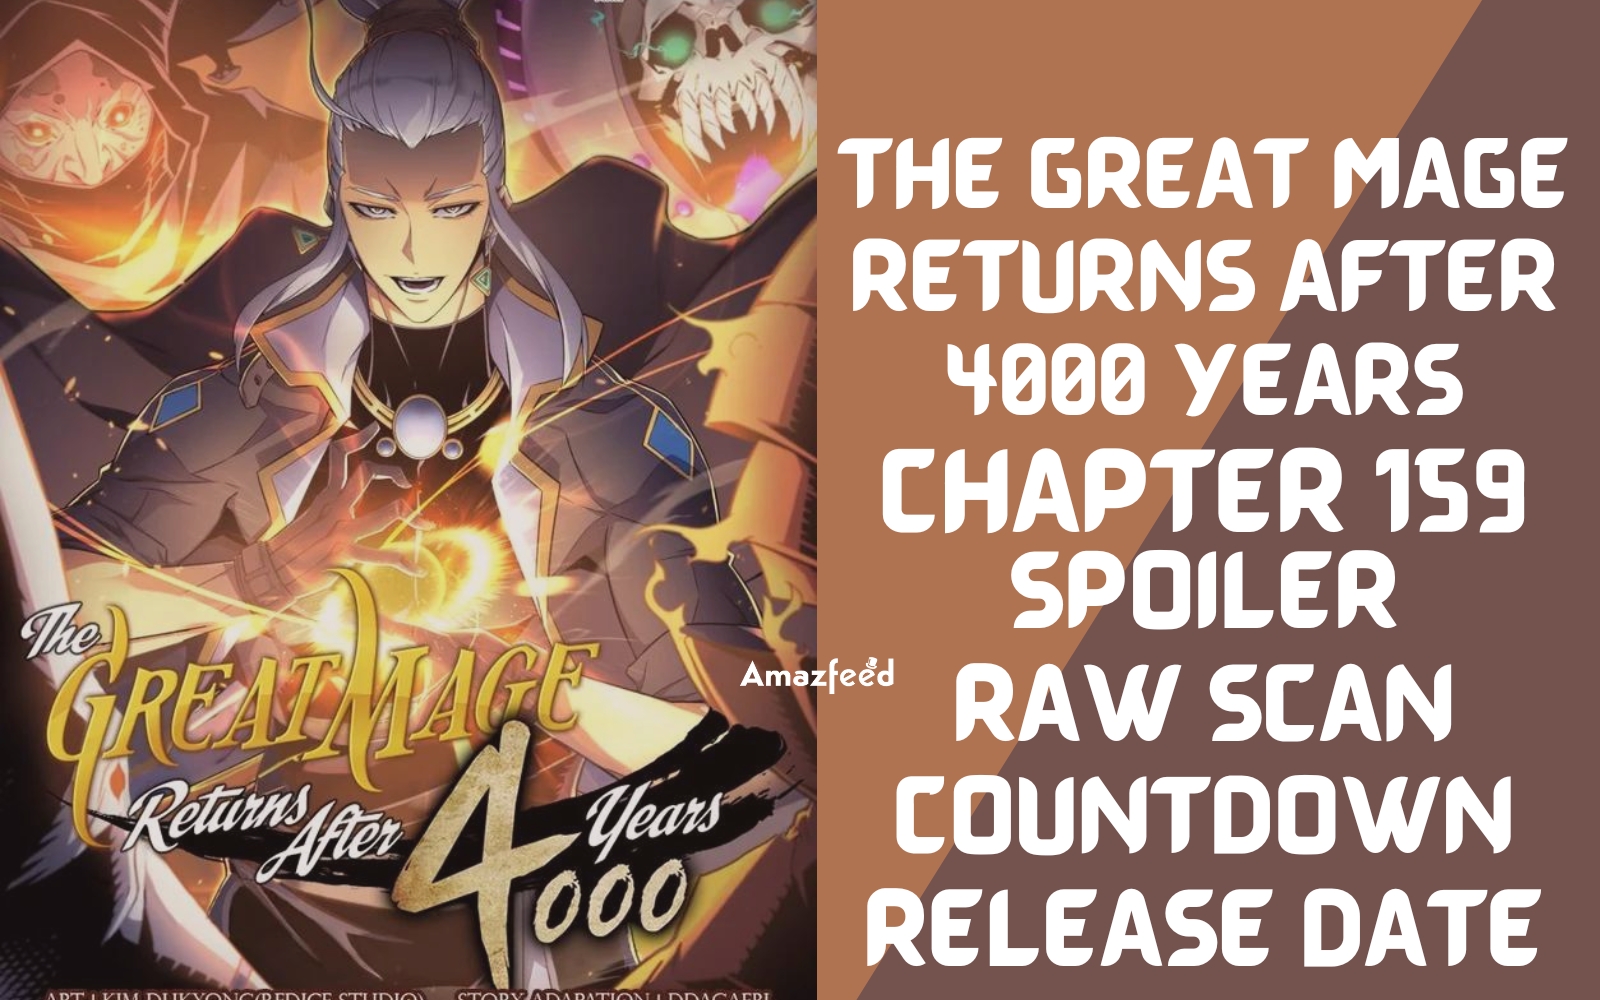 The Great Mage Returns After 4000 Years Chapter 159 Spoiler, Raw Scan, Release Date, Count Down